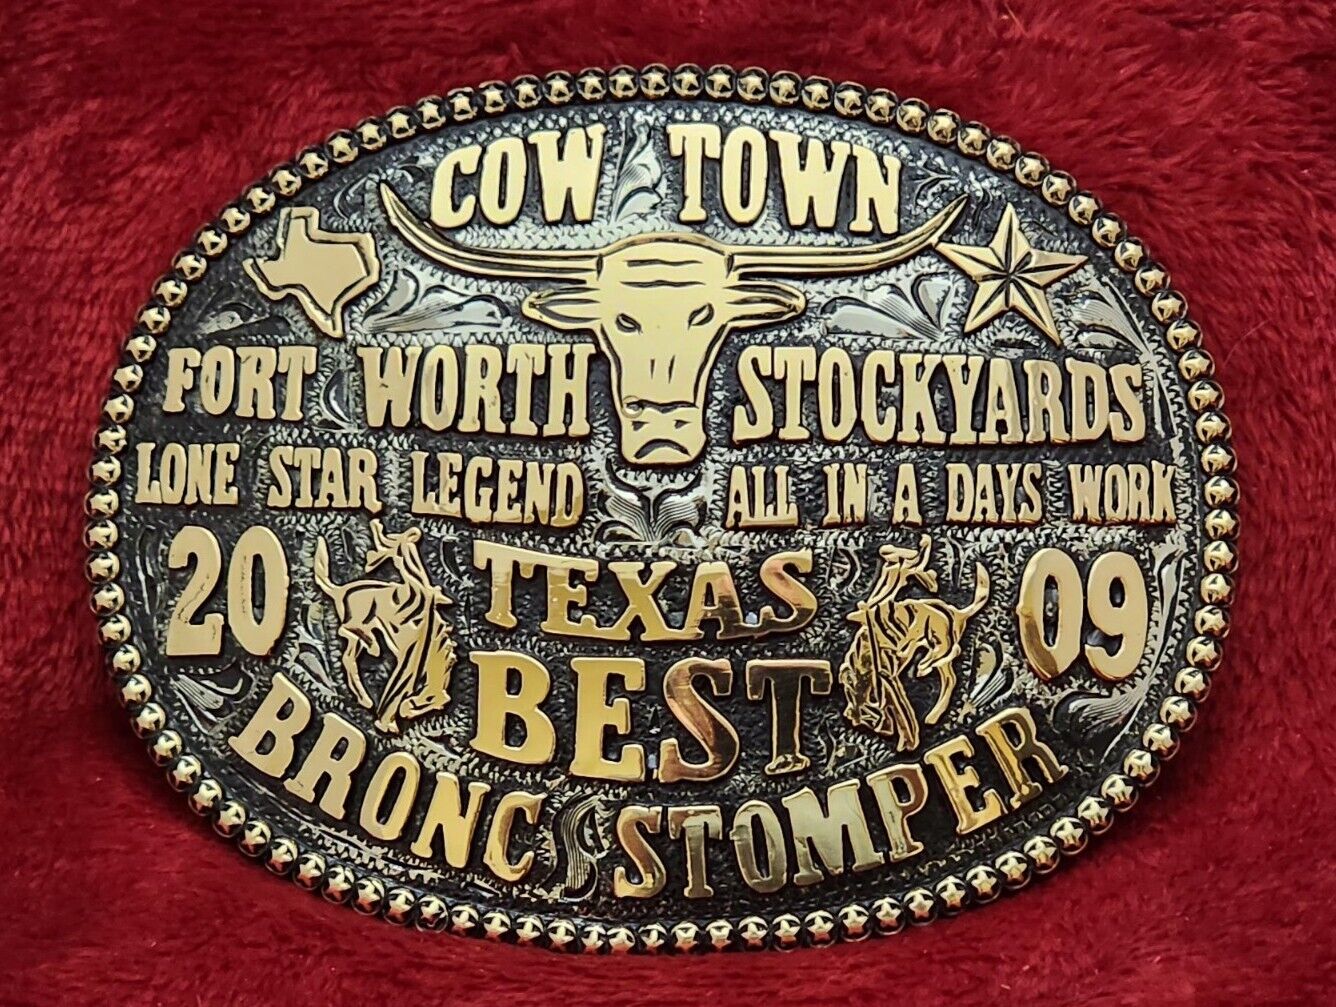 CHAMPION TROPHY RODEO BUCKLE☆PRO BRONC RIDER☆FORT WORTH COWTOWN☆2009☆RARE☆R63